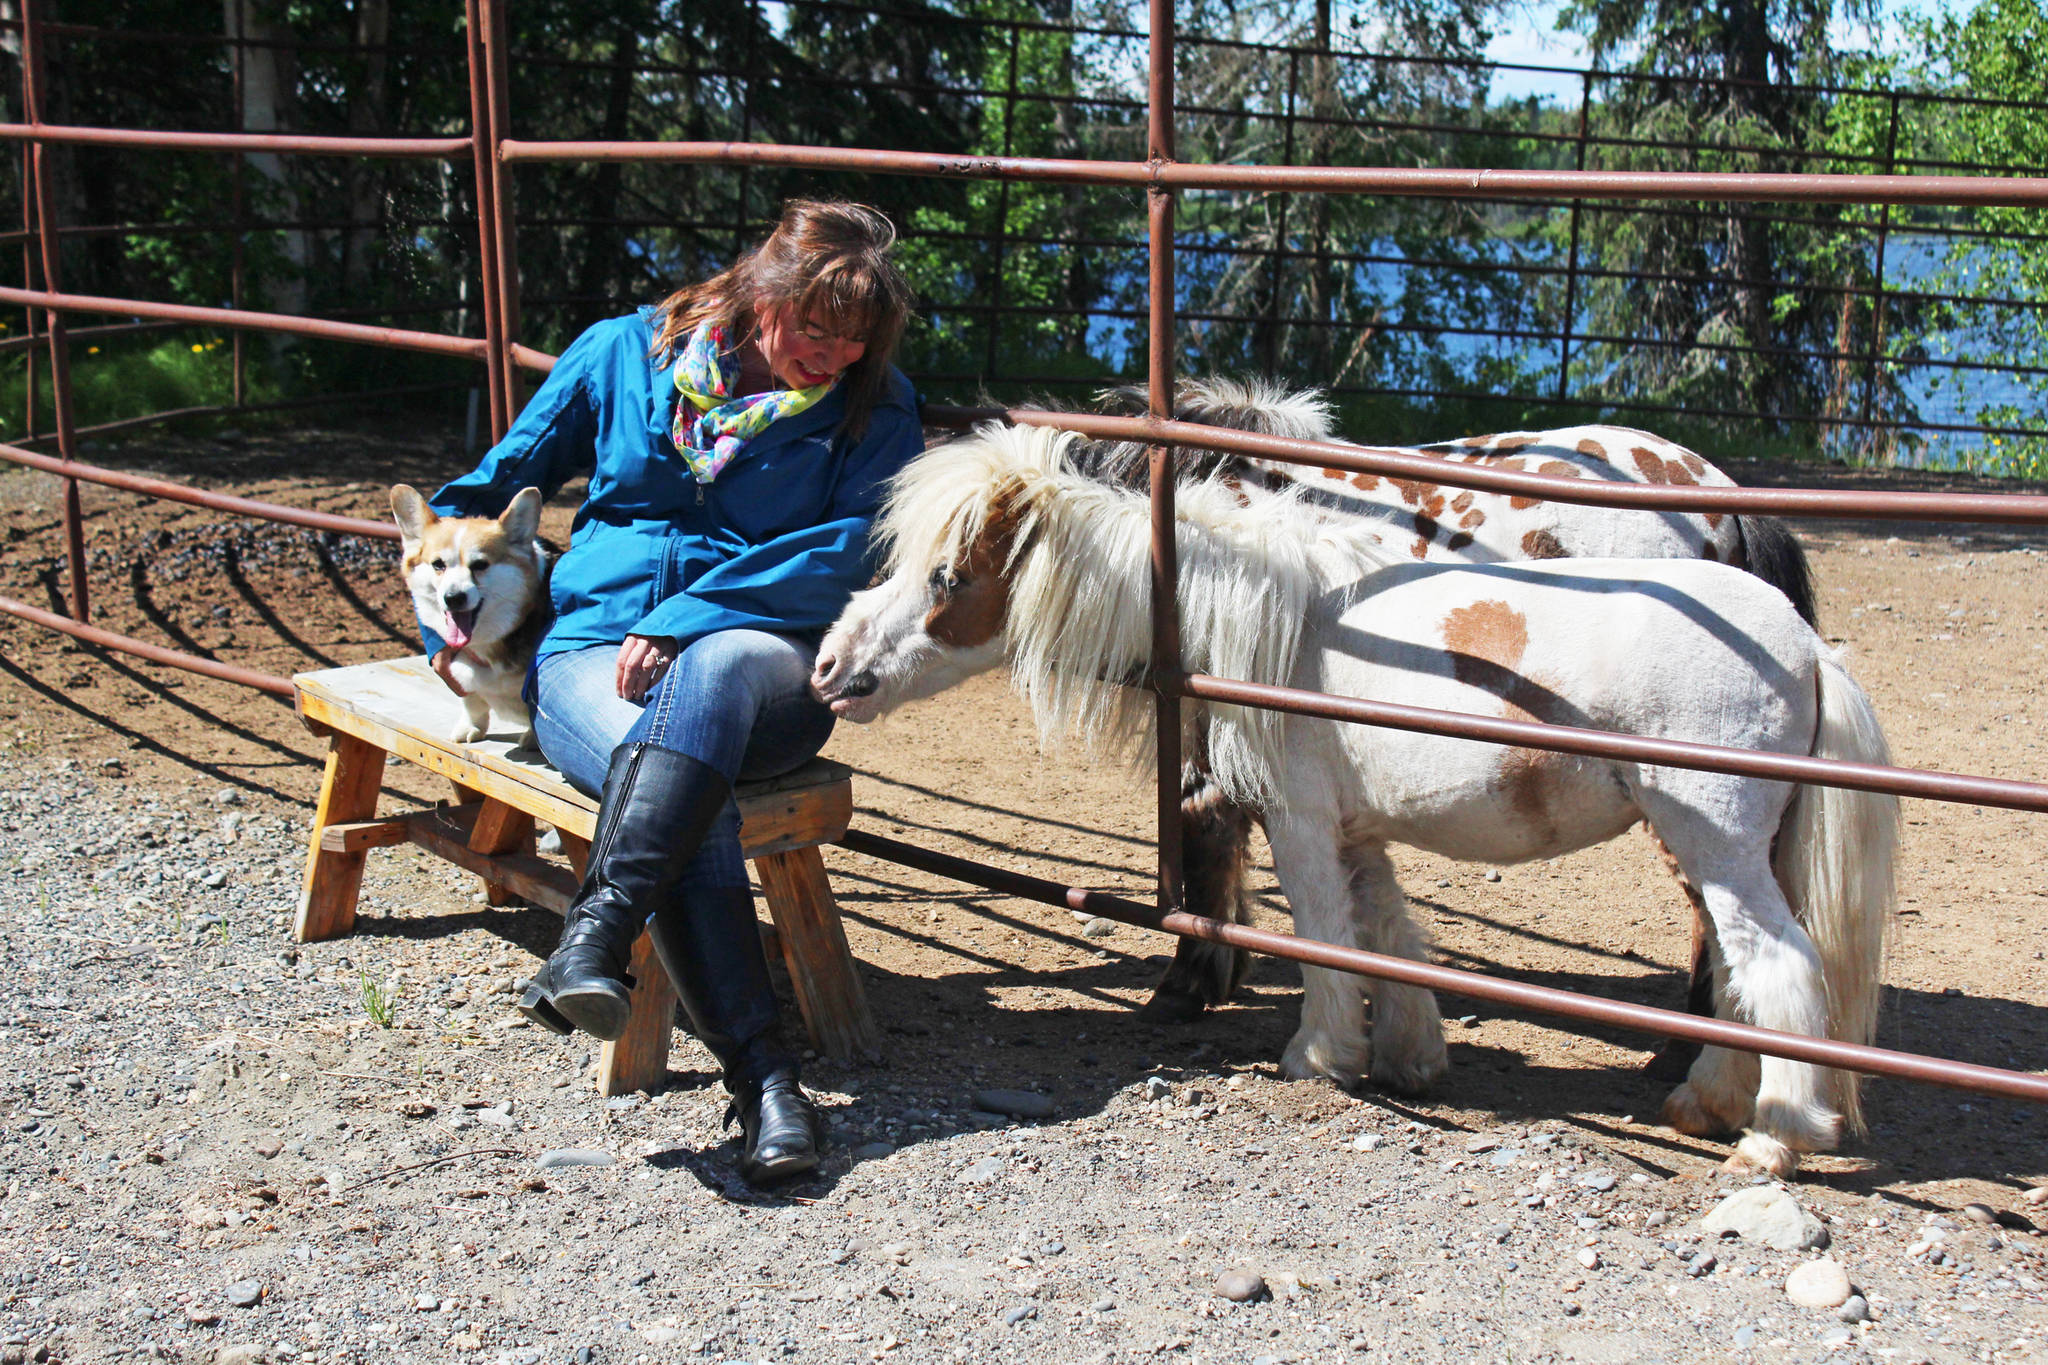 Geri Litzen sits with her two miniature horses, Pixie Dust and Magic, and her corgi, Dandelion, outside her home Wednesday, June 14, 2017 in Nikiski, Alaska. Litzen has recently opened a business called Milestones Equine Therapy run out of her home. (Megan Pacer/Peninsula Clarion)